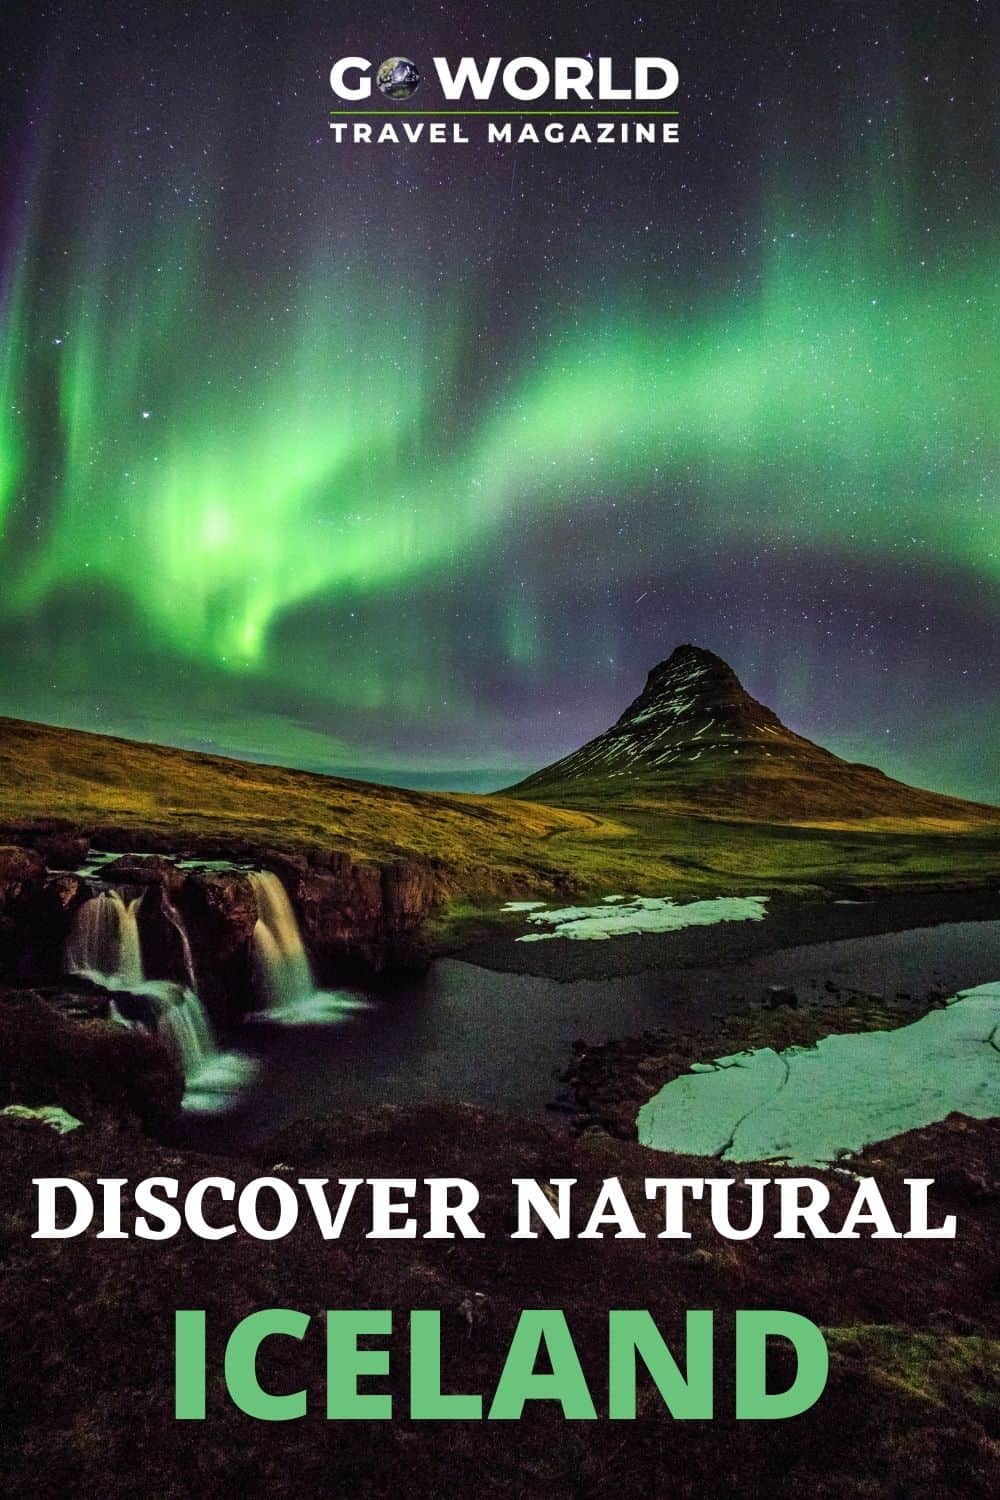 The beauty of natural Iceland is beyond compare. One of the ways to fully experience the real Iceland is through environmental volunteerism. #Iceland #environmentalvolunteerism